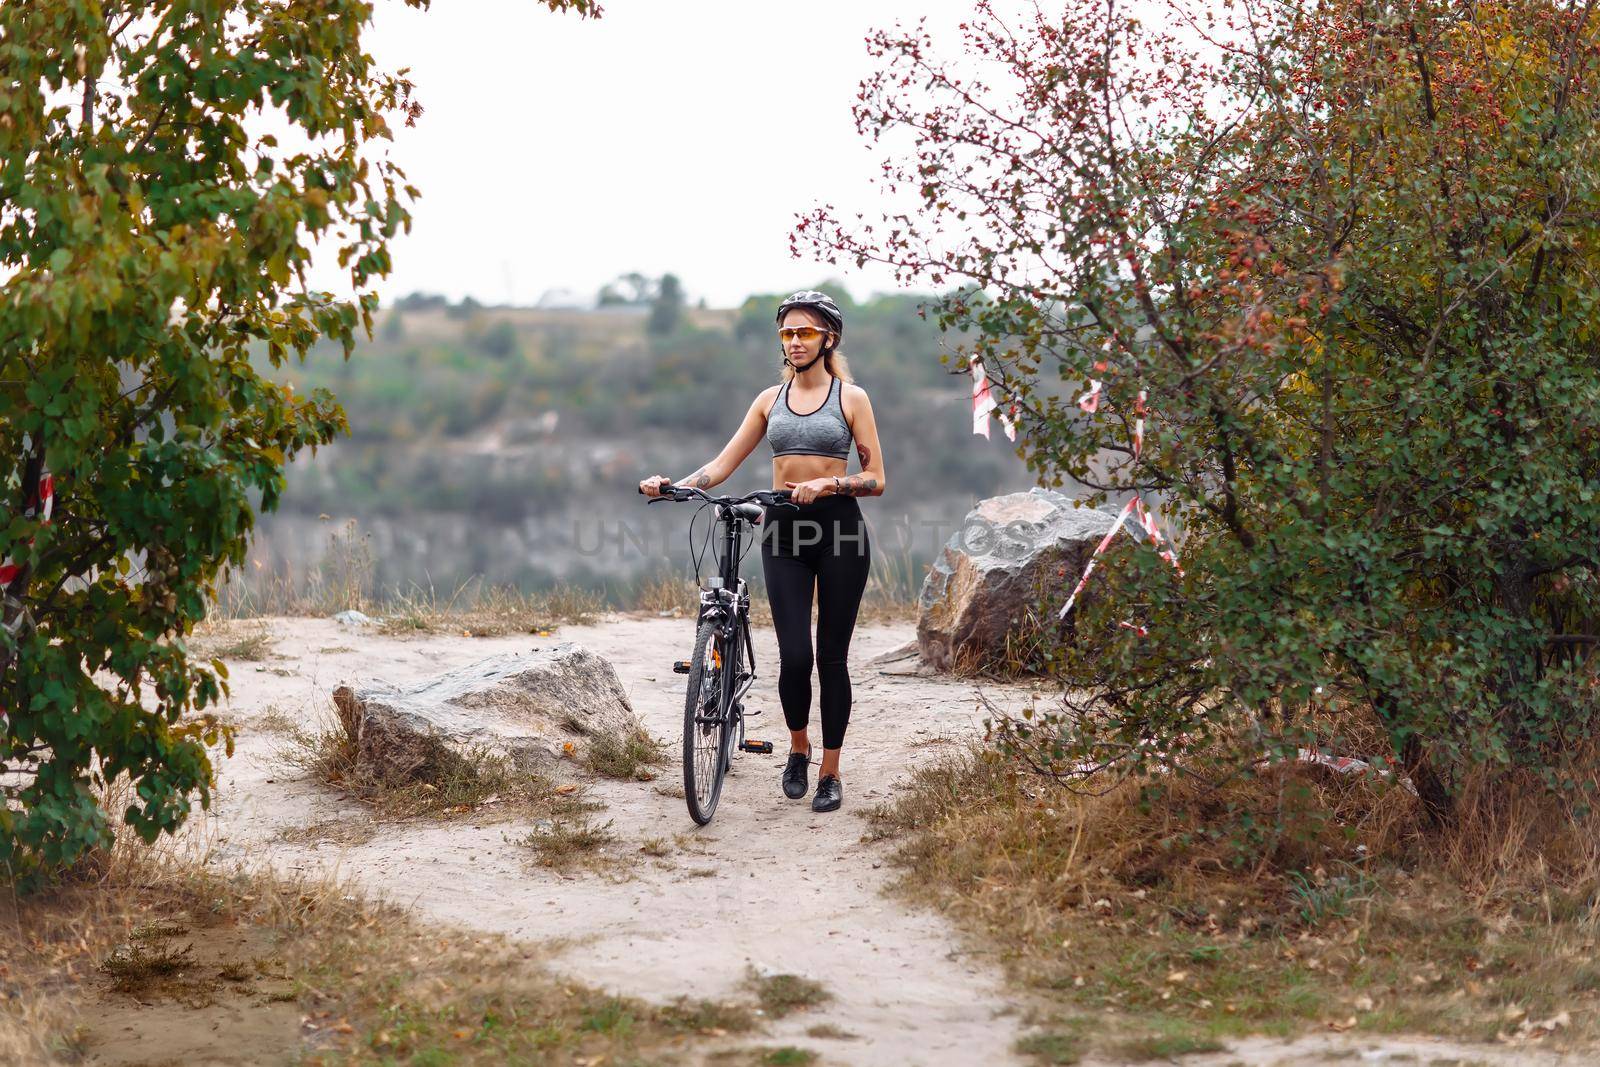 Fit young woman wearing sportswear standing with her bicycle on rocky background at autumn day